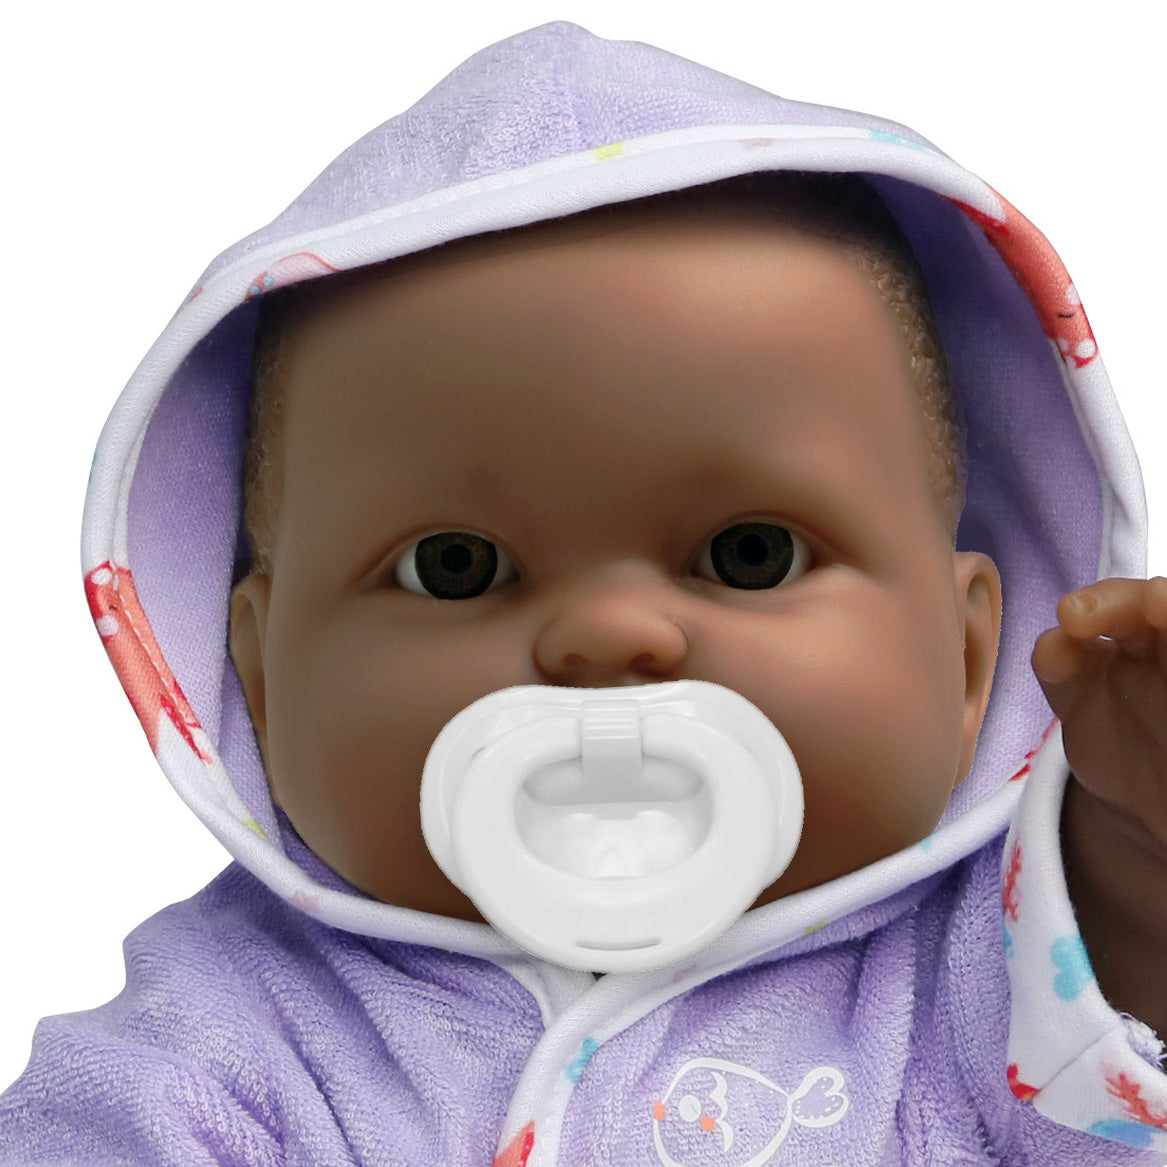 Lots to Love Babies® All-Vinyl Baby Doll w/ Hooded Towel and Bath Accessories. African American.